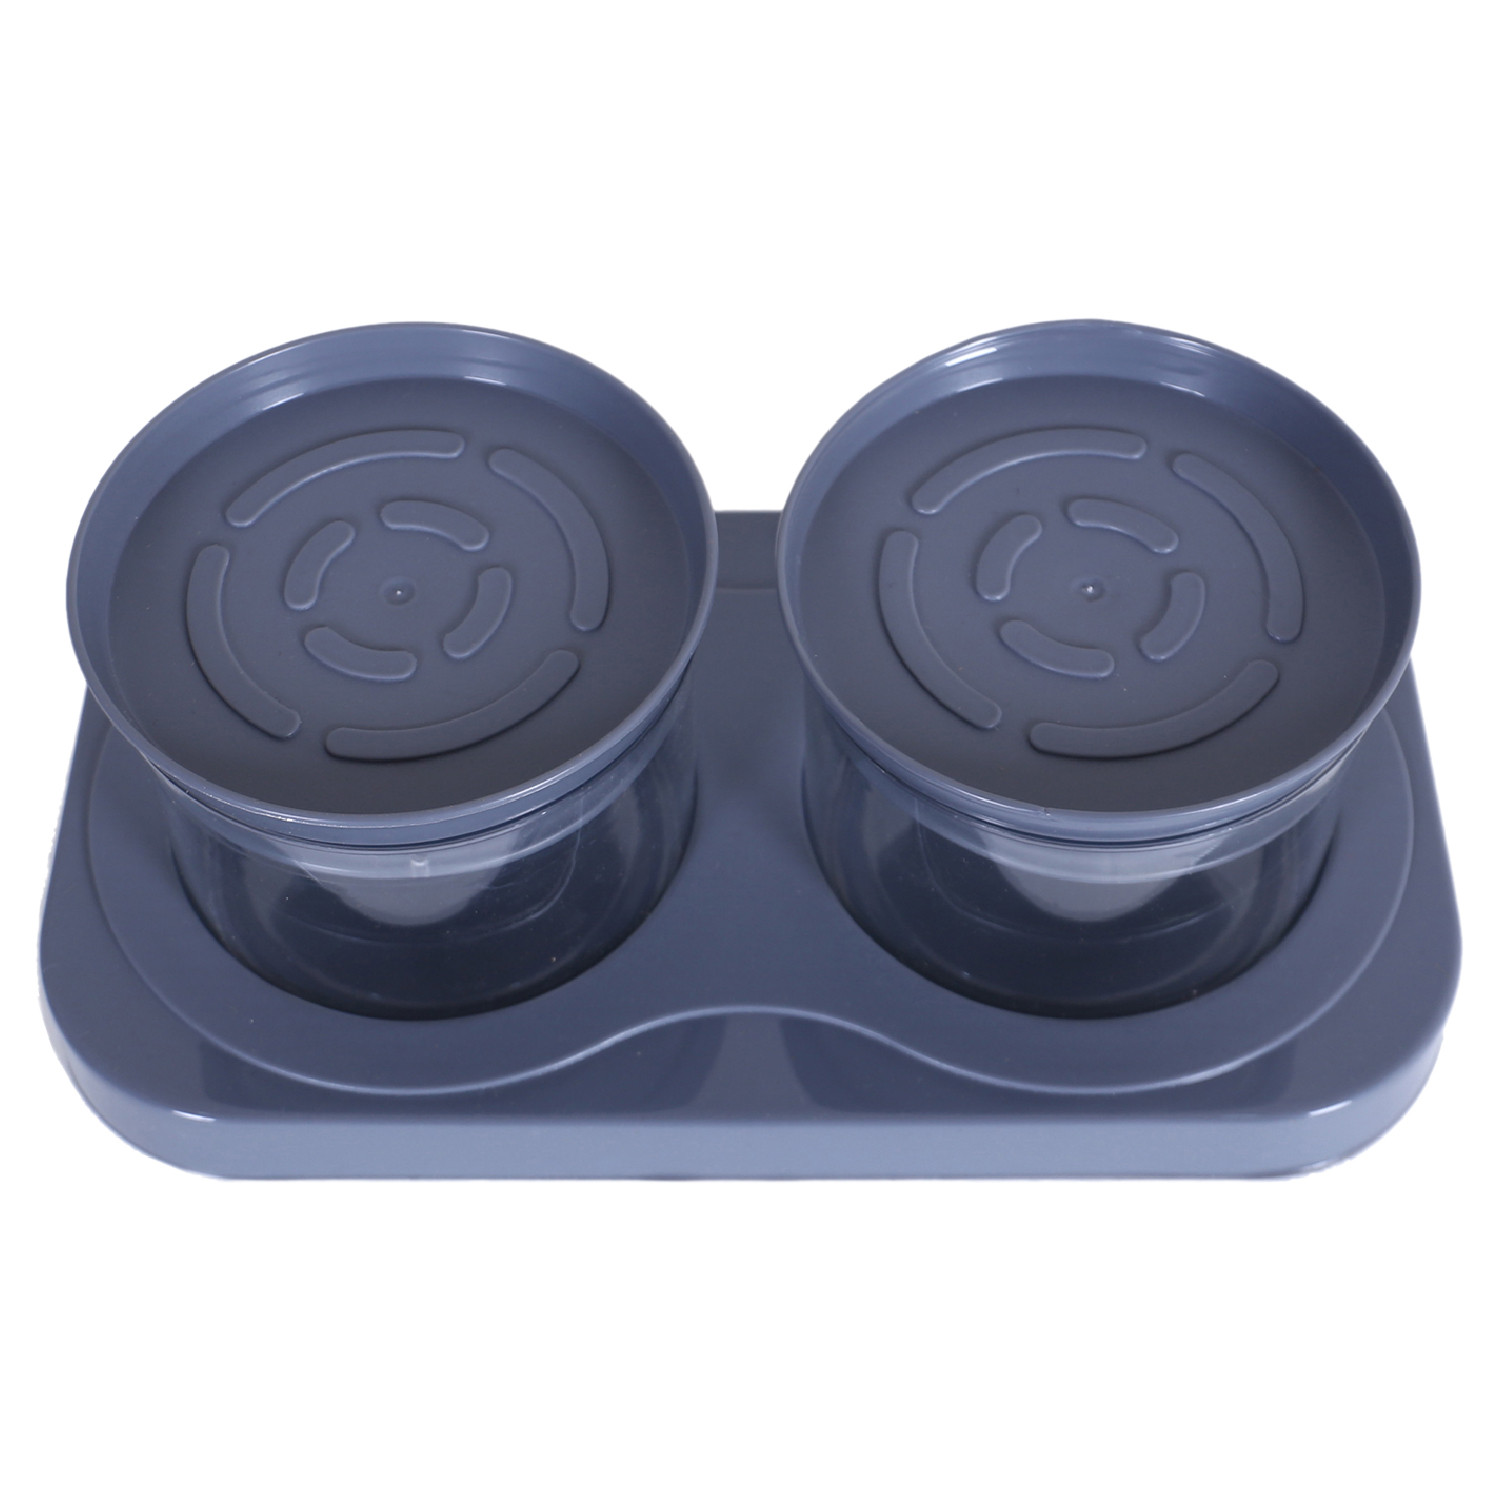 Kuber Industries 2 Containers & Tray Set|Unbreakable Plastic Snackers,Cookies,Nuts Serving Tray|Airtight Containers with Lid,350 ml (Gray)